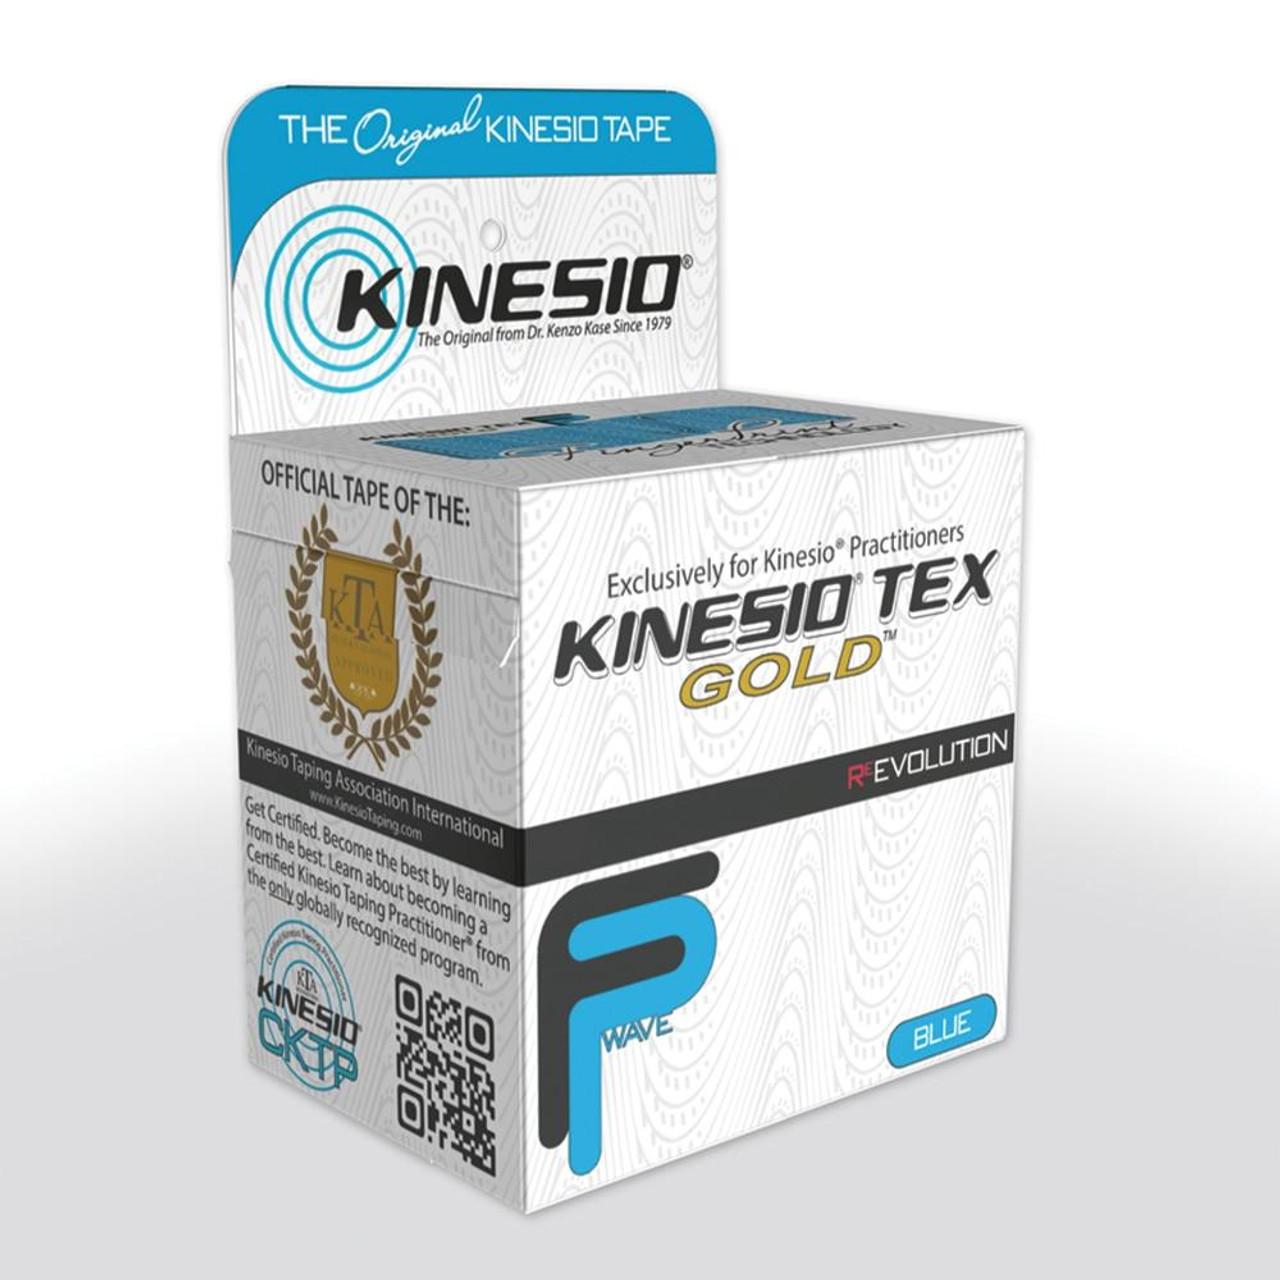 Kinesio Tex Gold Tape - 16.4 Ft. - Banner Therapy